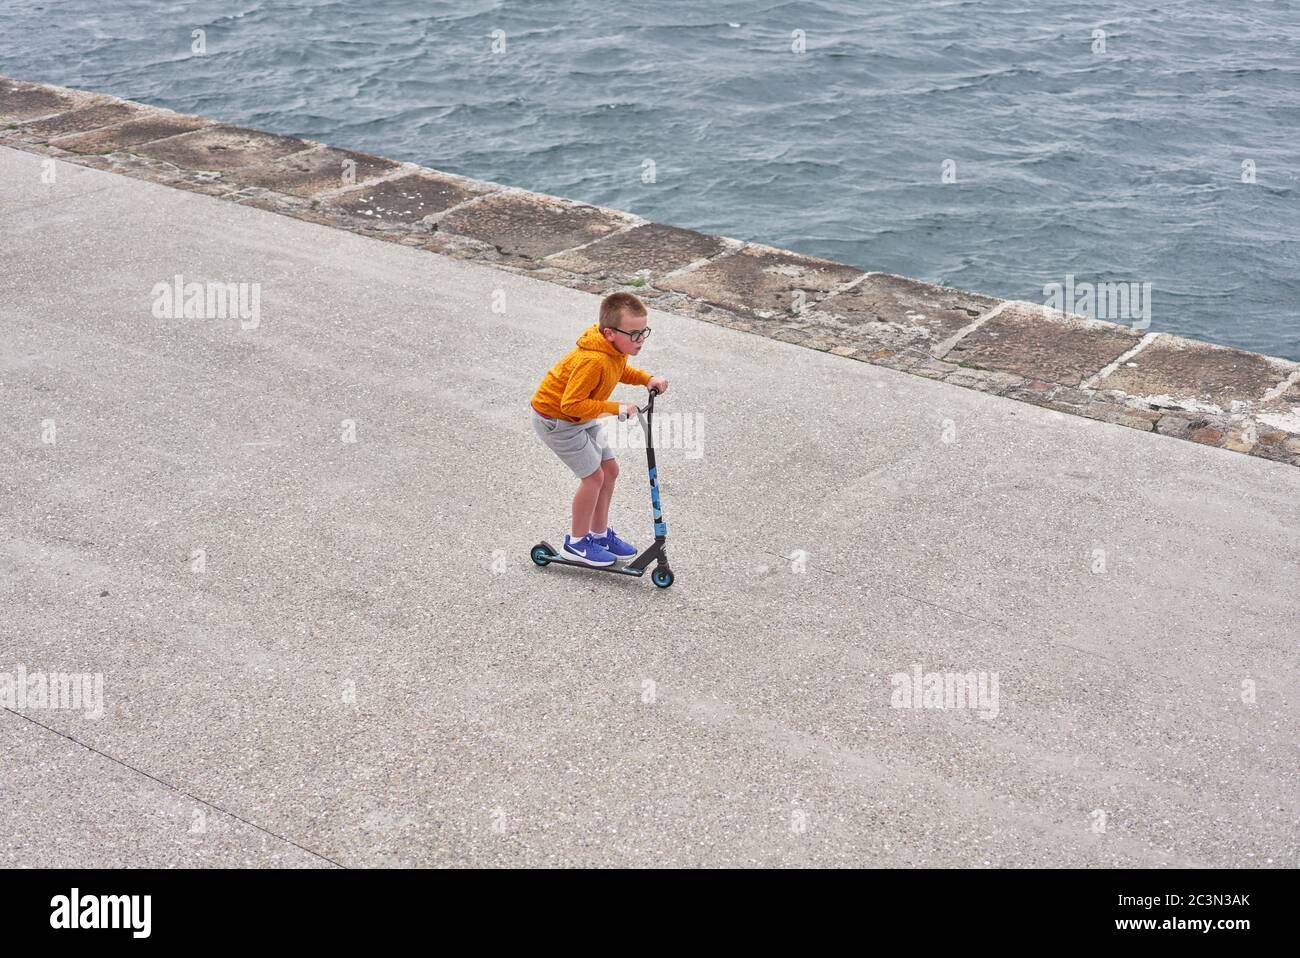 A boy on riding a scooter on Dun Laoghaire pier in Dublin city, Ireland. Stock Photo